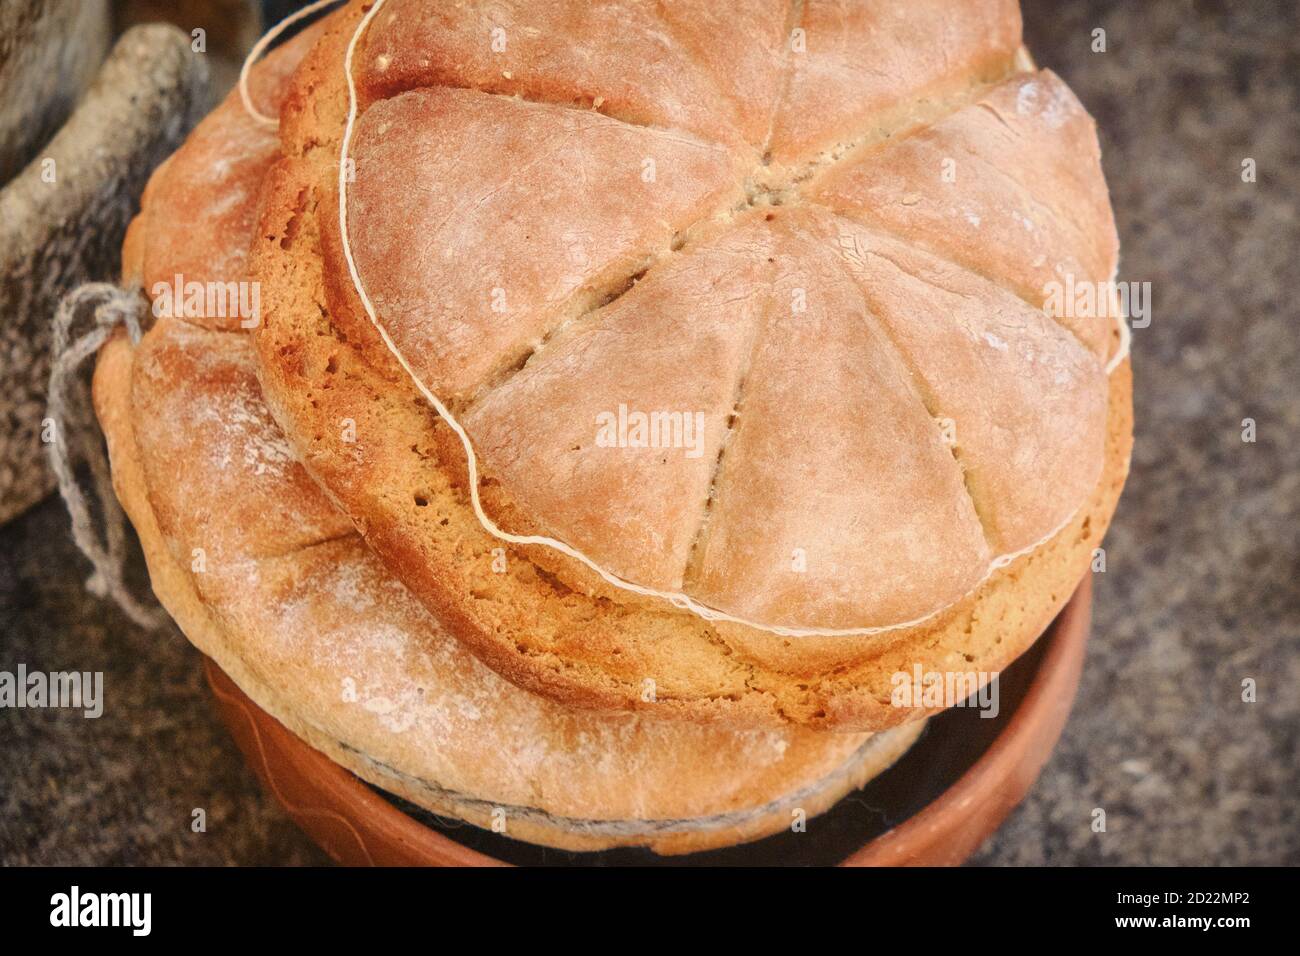 The bread baked at the retro technology of ancient Rome. Reconstruction of cooking in the ancient era. Roman bread, reconstruction. Stock Photo